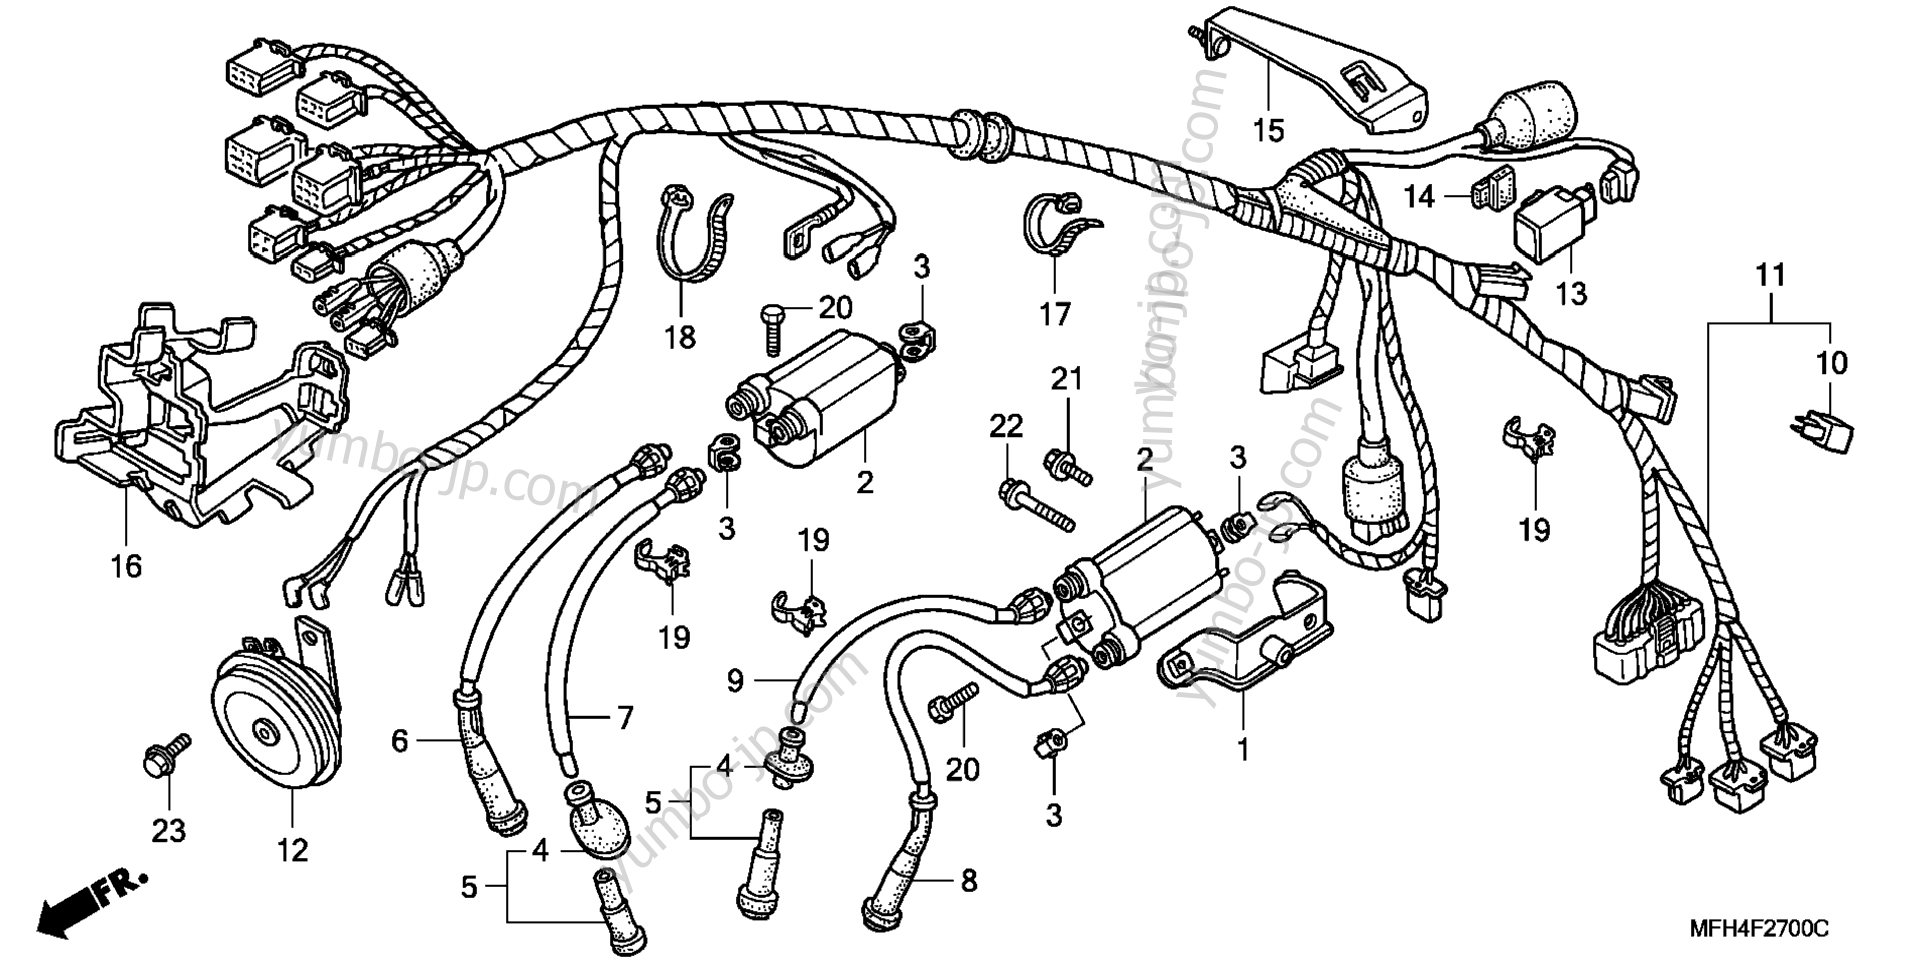 WIRE HARNESS for motorcycles HONDA VT600C A/A 2006 year